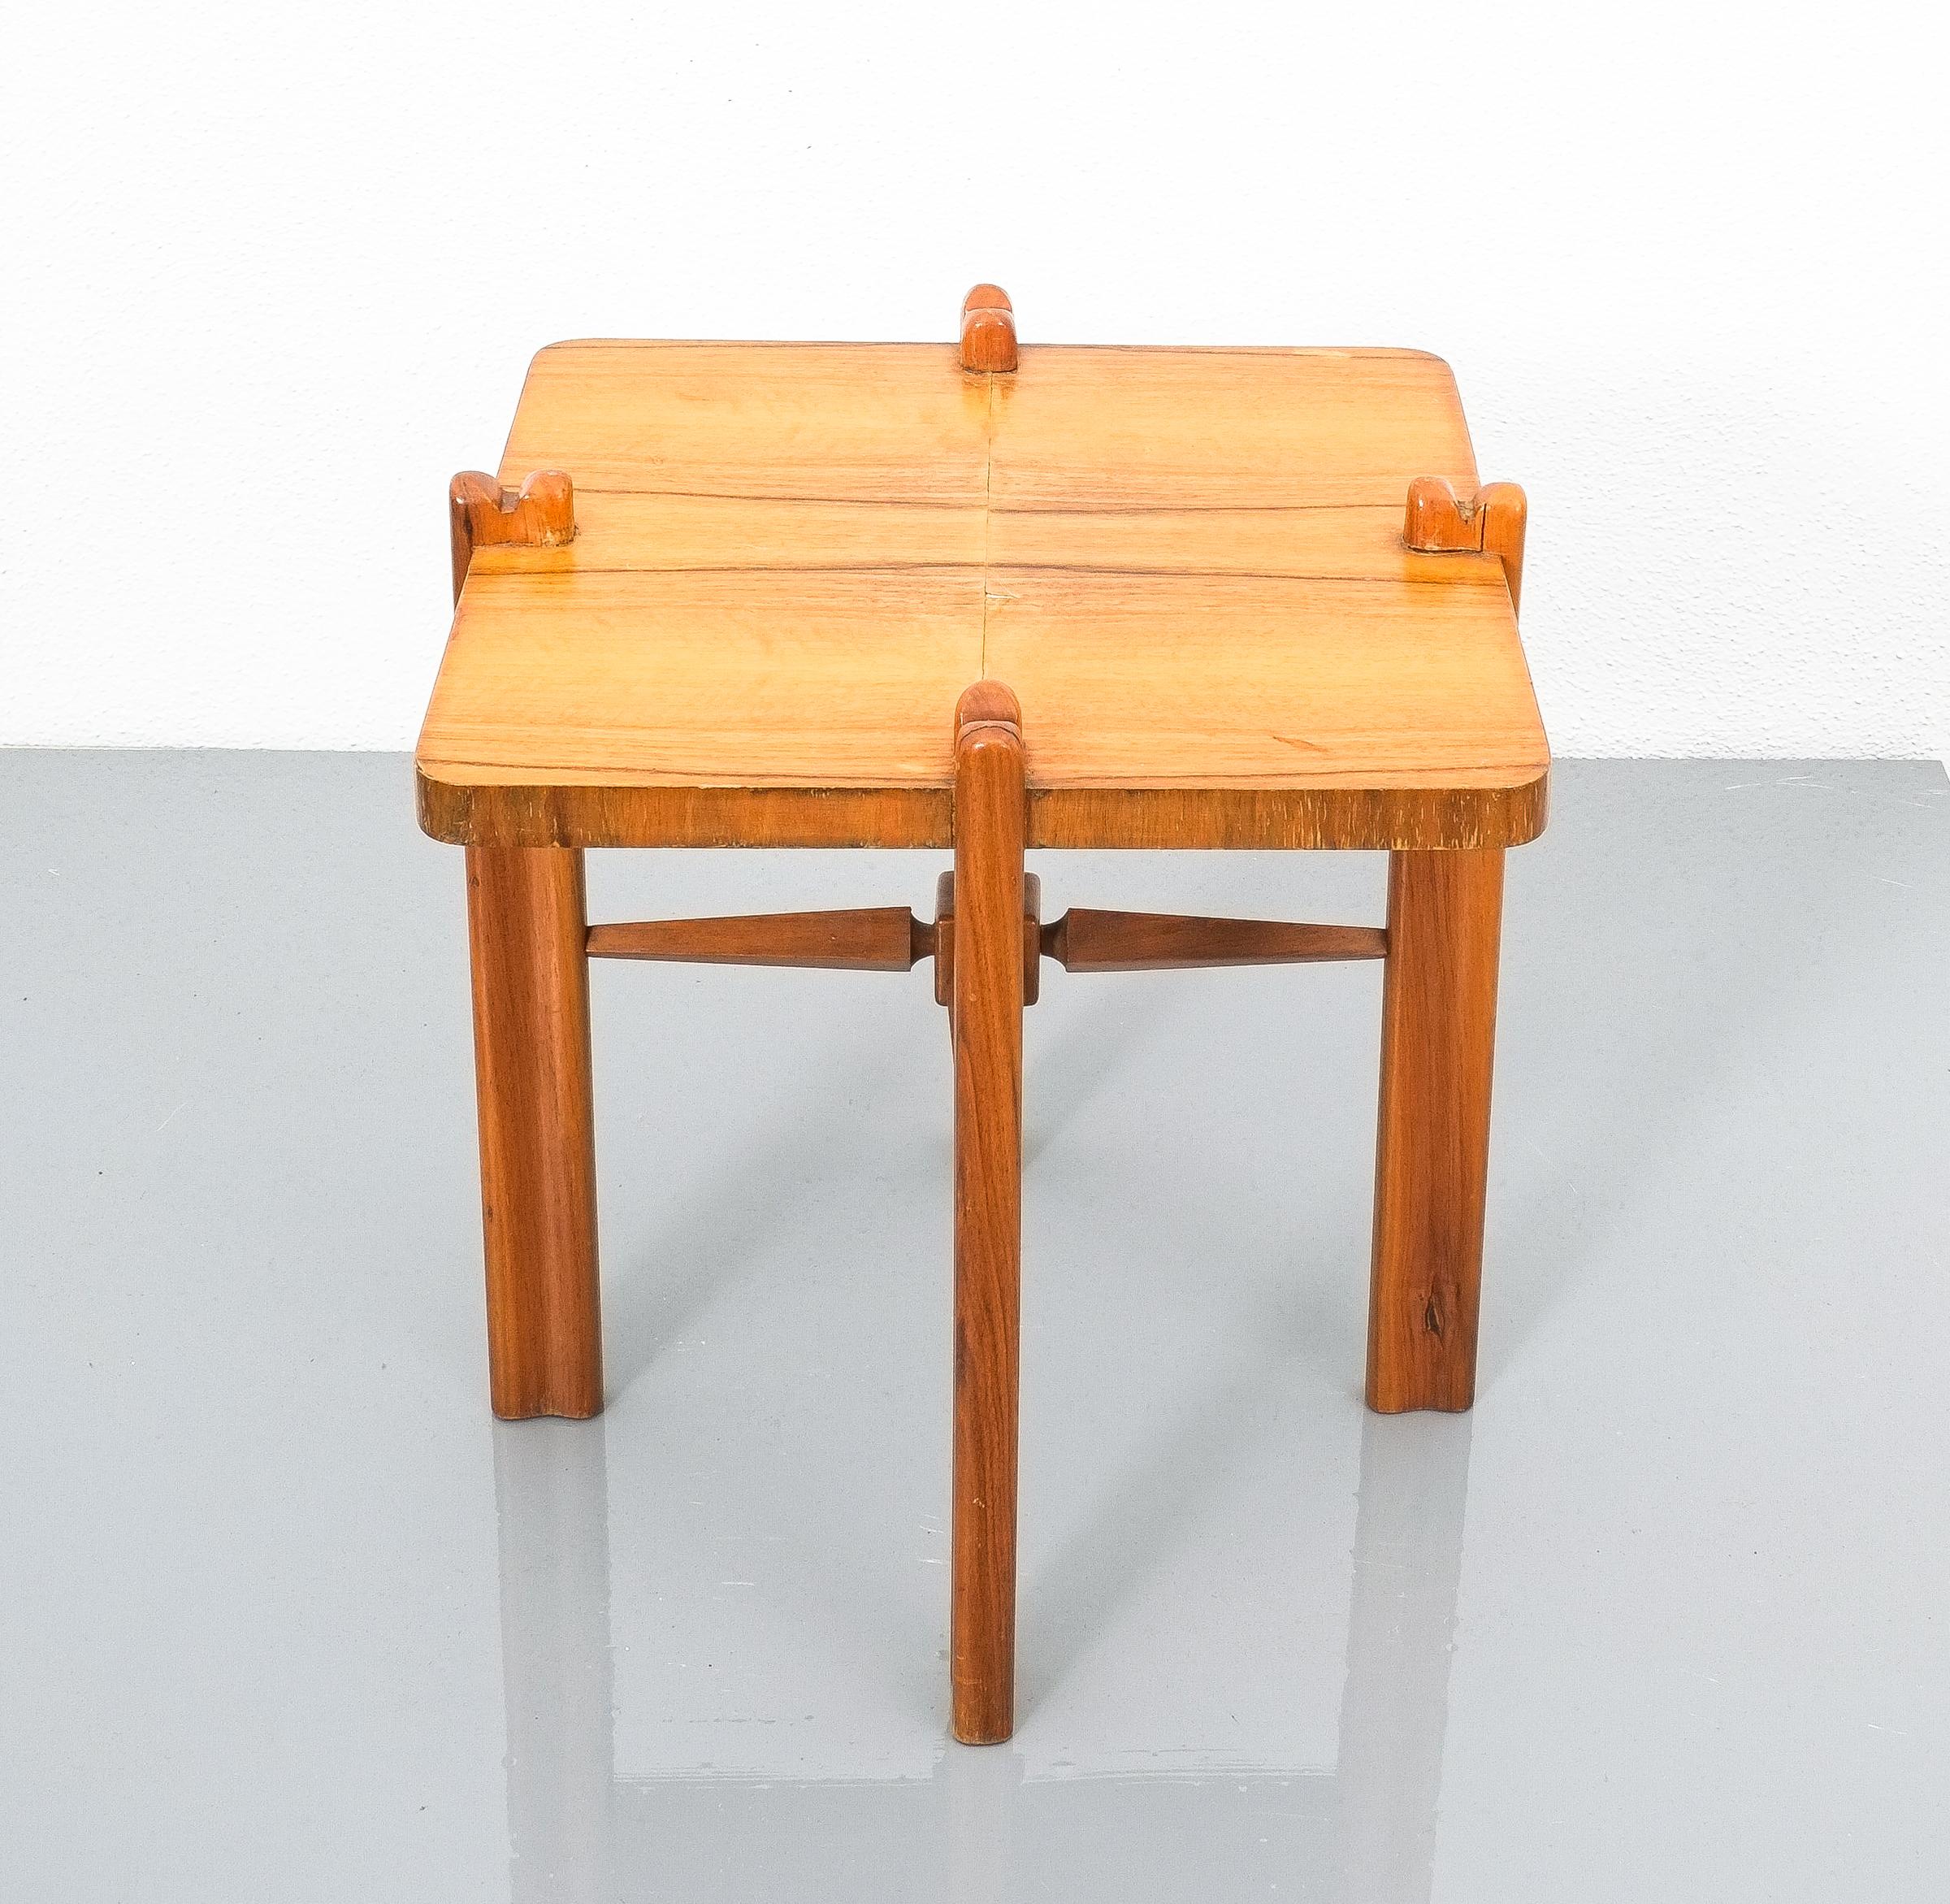 Hand-Crafted Mid Century Side Tables Walnut Wood Josef Frank, circa 1955 For Sale